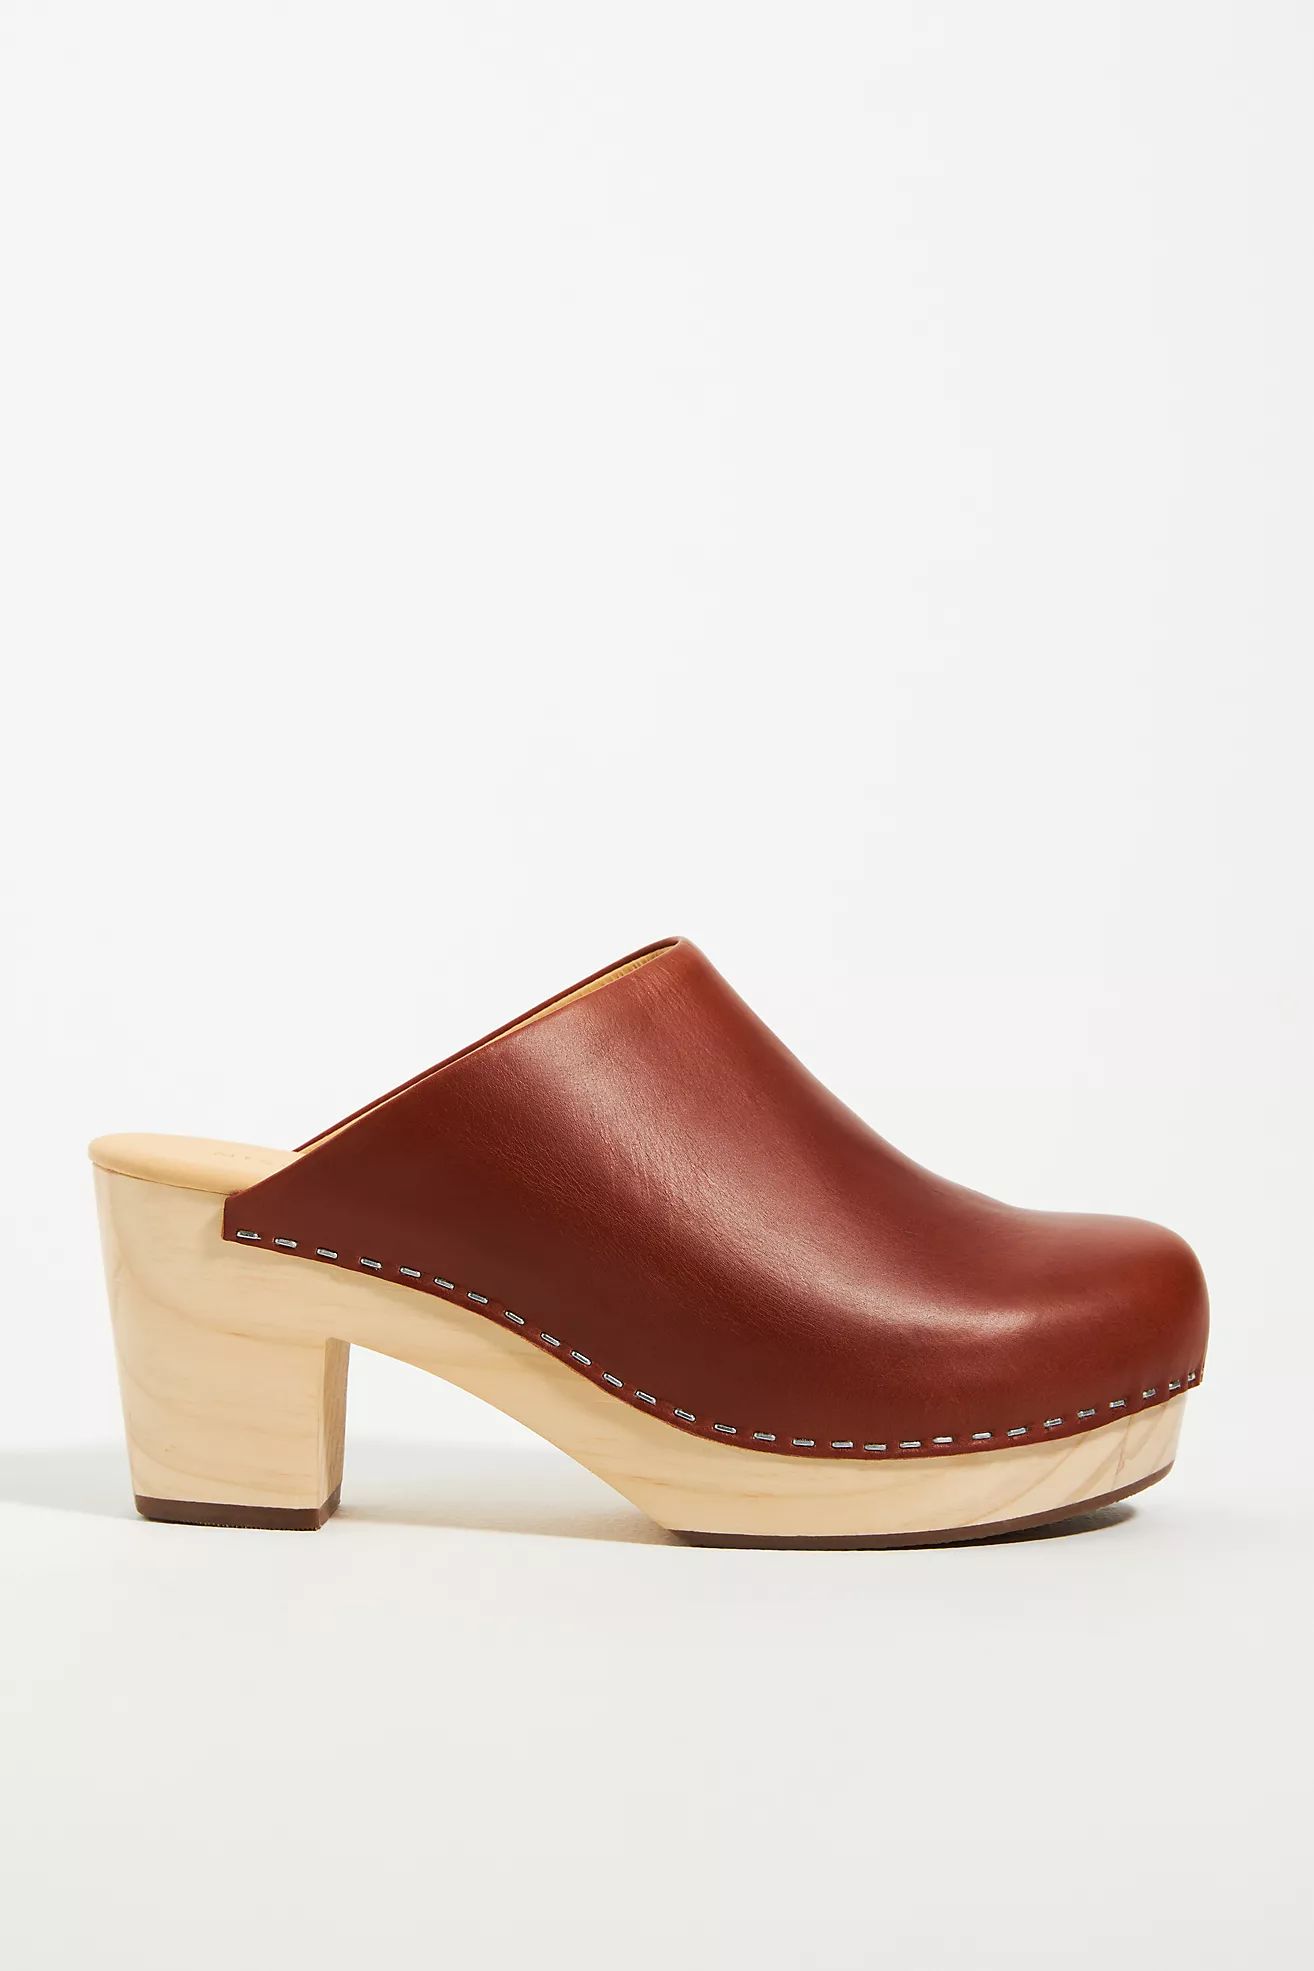 Nisolo All-Day Heeled Clogs | Anthropologie (US)